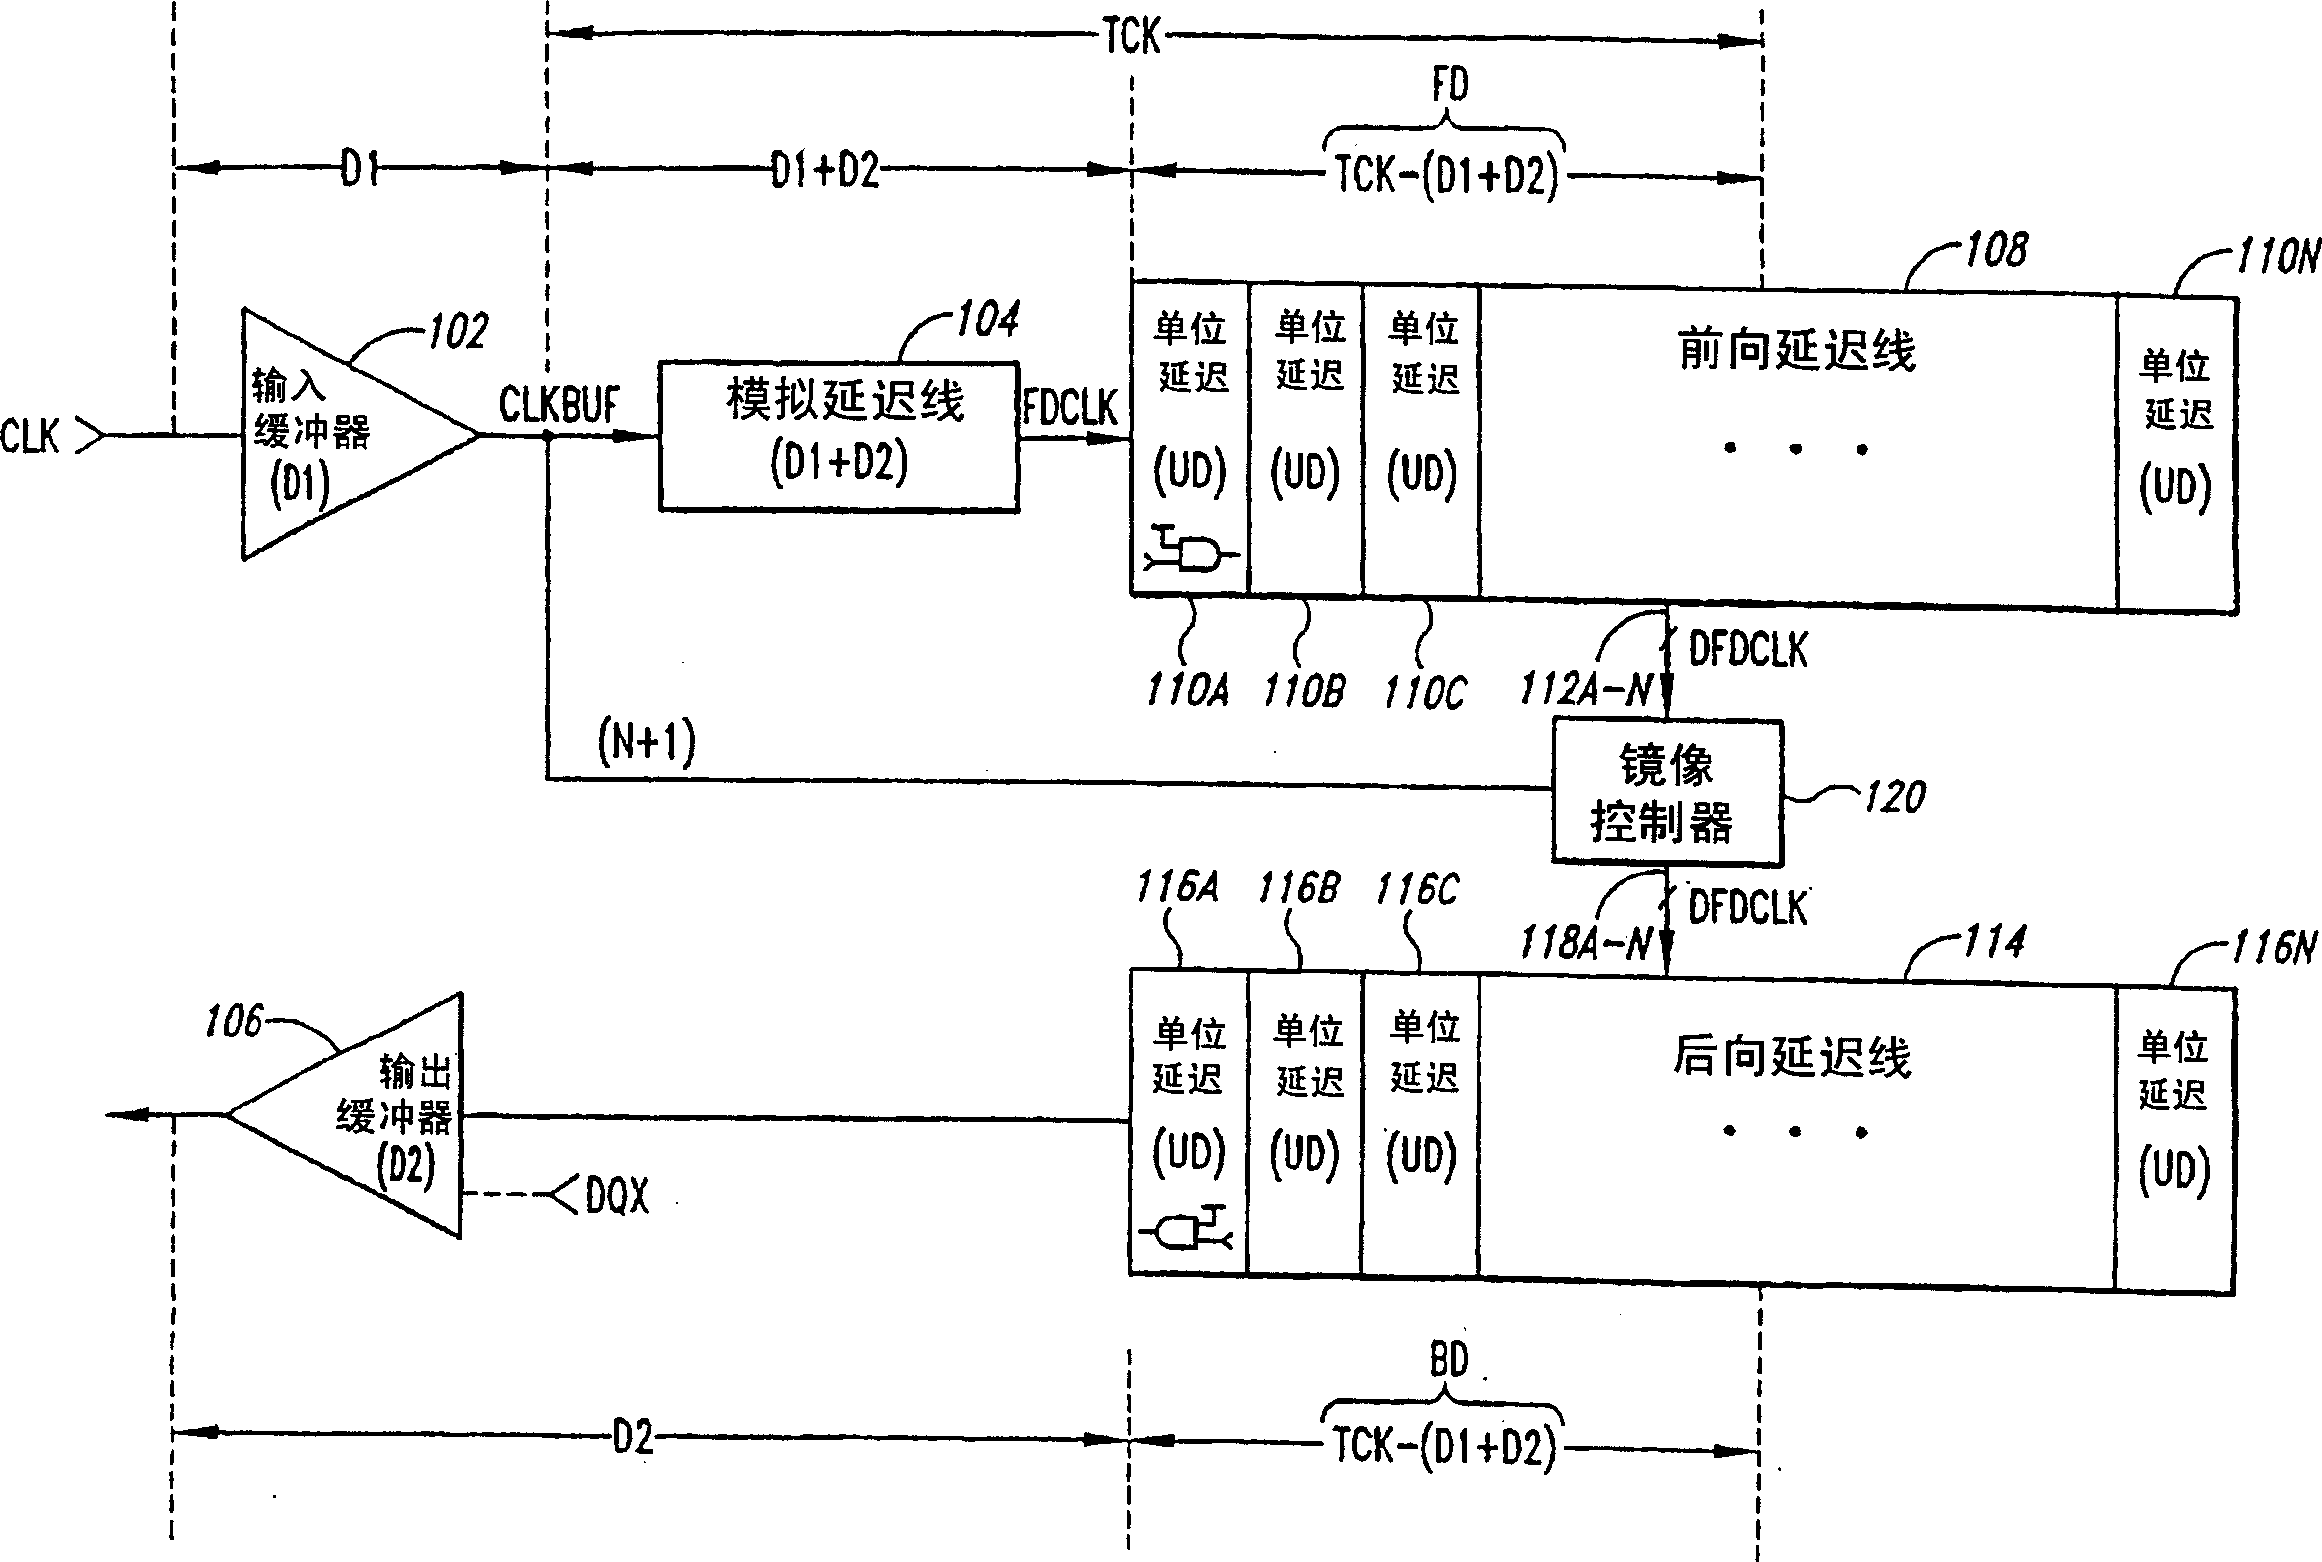 Synchronous mirror delay (SMD) circuit and method including a ring oscillator for timing coarse and fine delay intervals